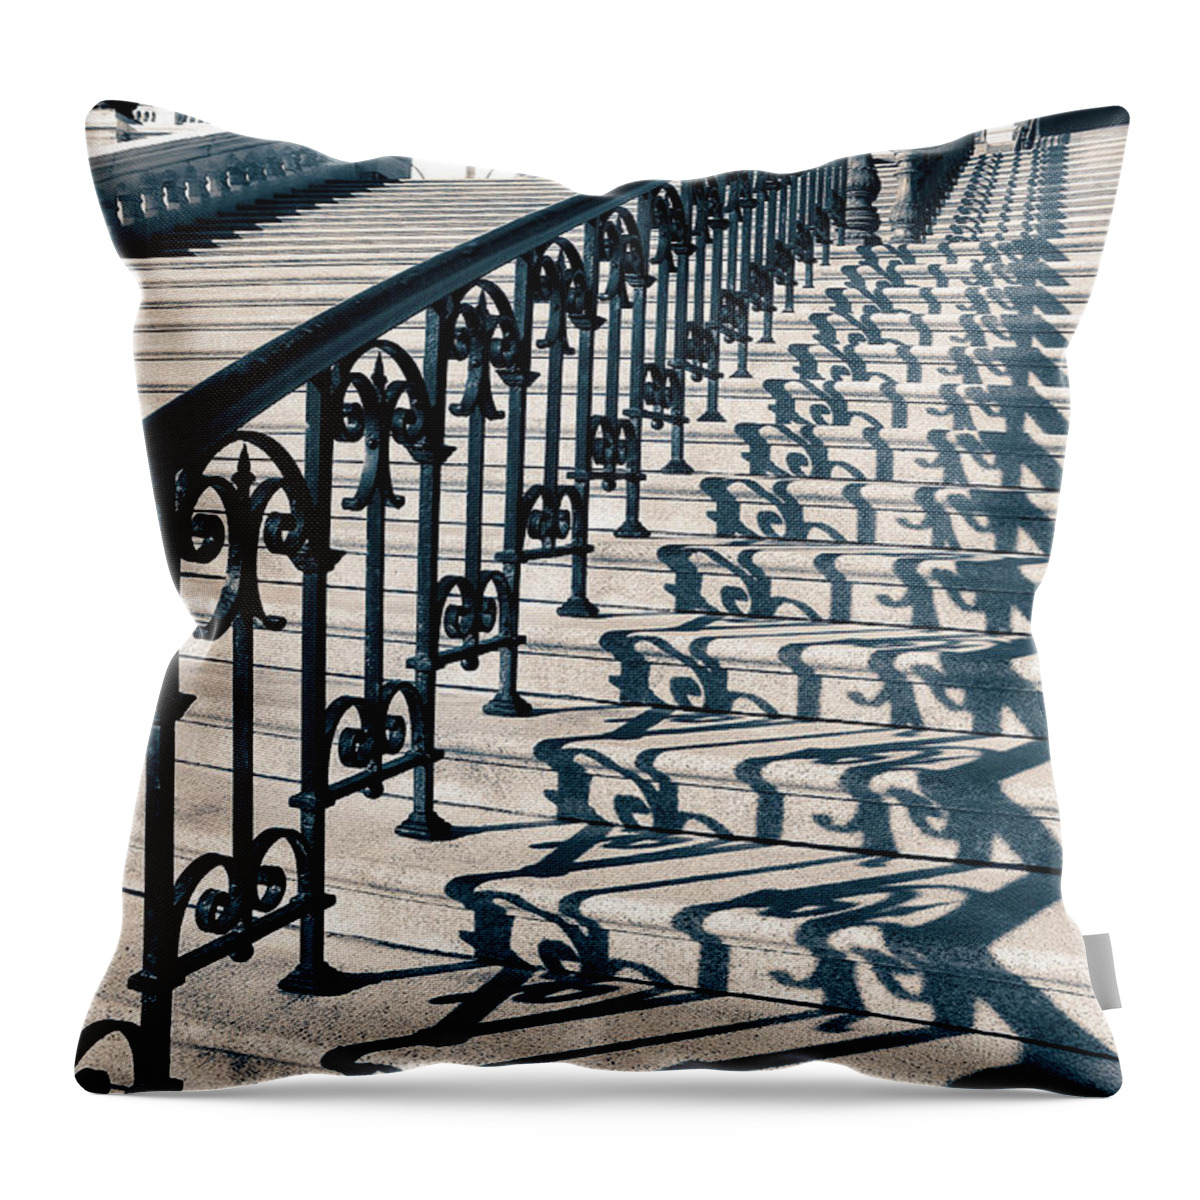 Staircase Throw Pillow featuring the photograph The Stairway by Iryna Goodall